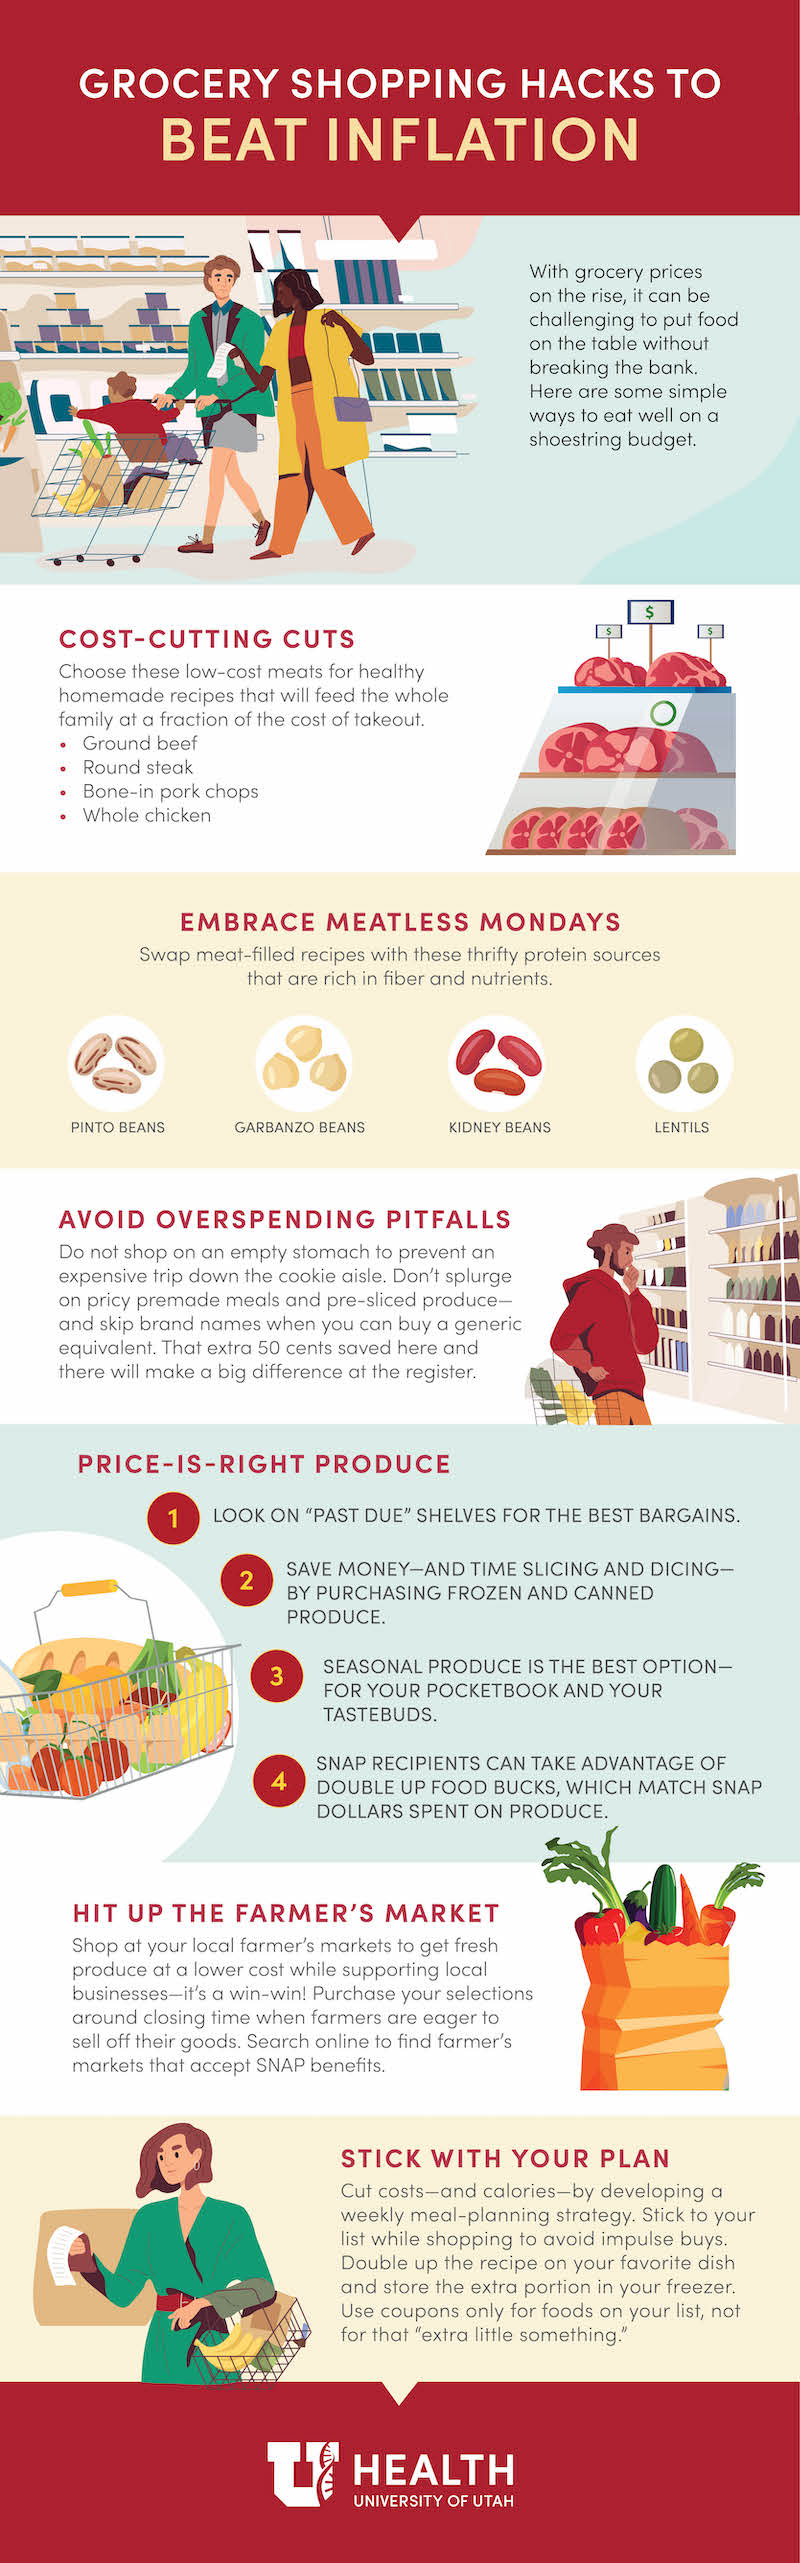 Healthy Food Budget Infographic